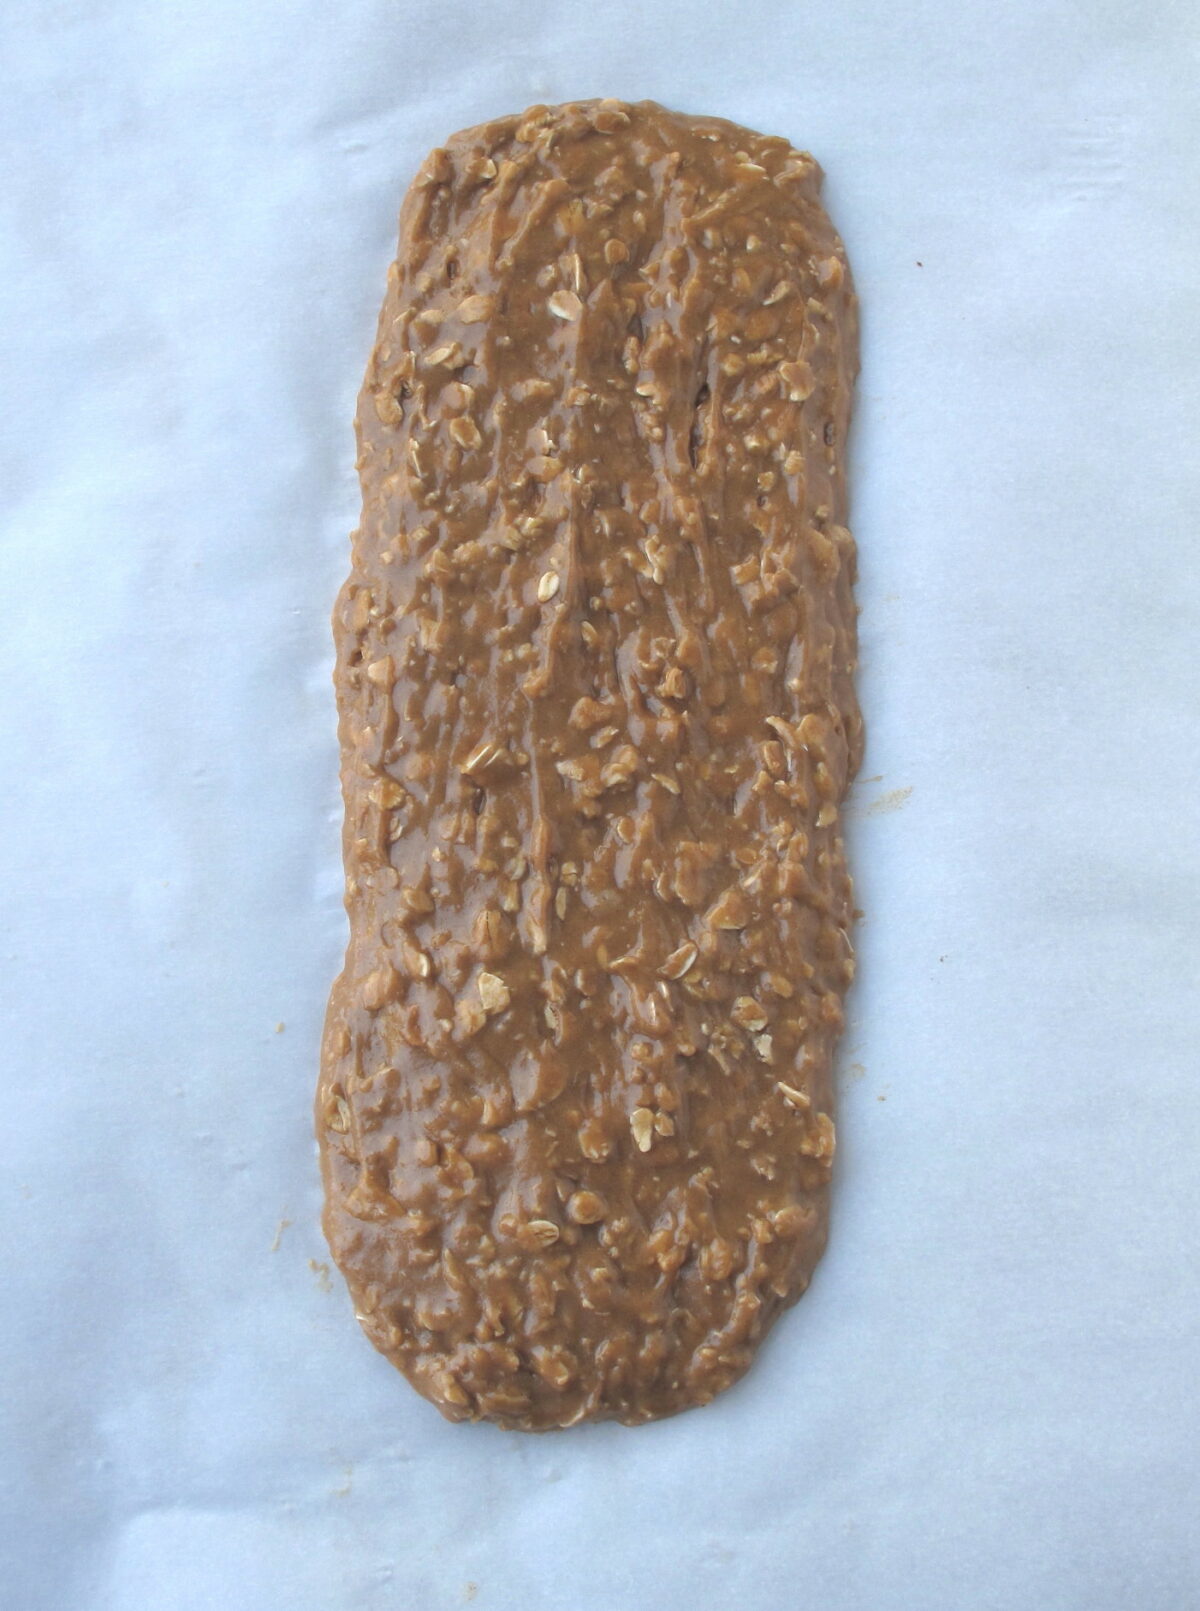 Biscotti batter log spread on a parchment lined baking sheet.